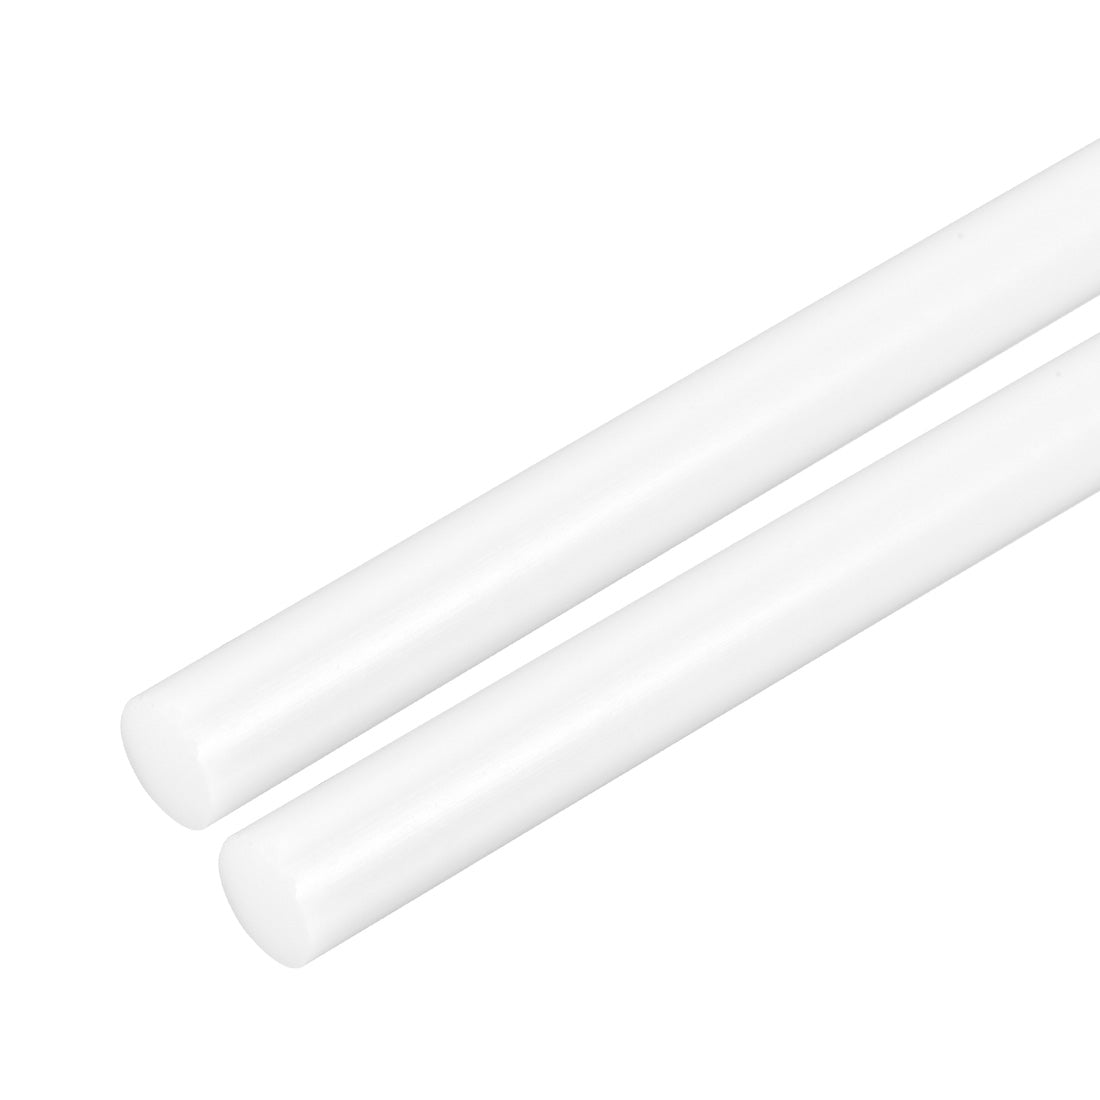 uxcell Uxcell Plastic Round Rod,12.5mm Dia 50cm White Engineering Plastic Round Bar 2pcs